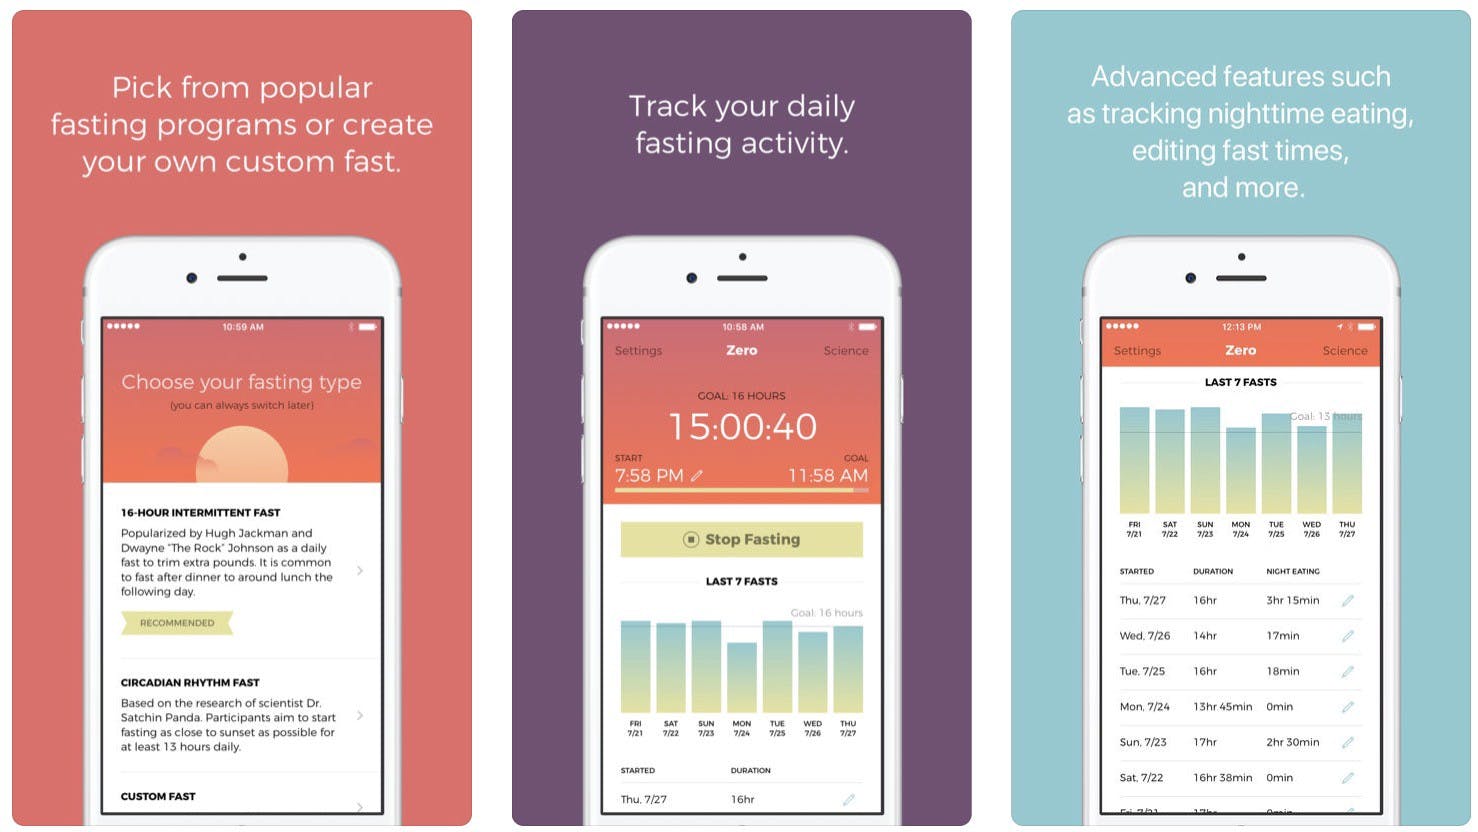 featured image - How Zero Wins: Product Analysis of the Fasting Tracker